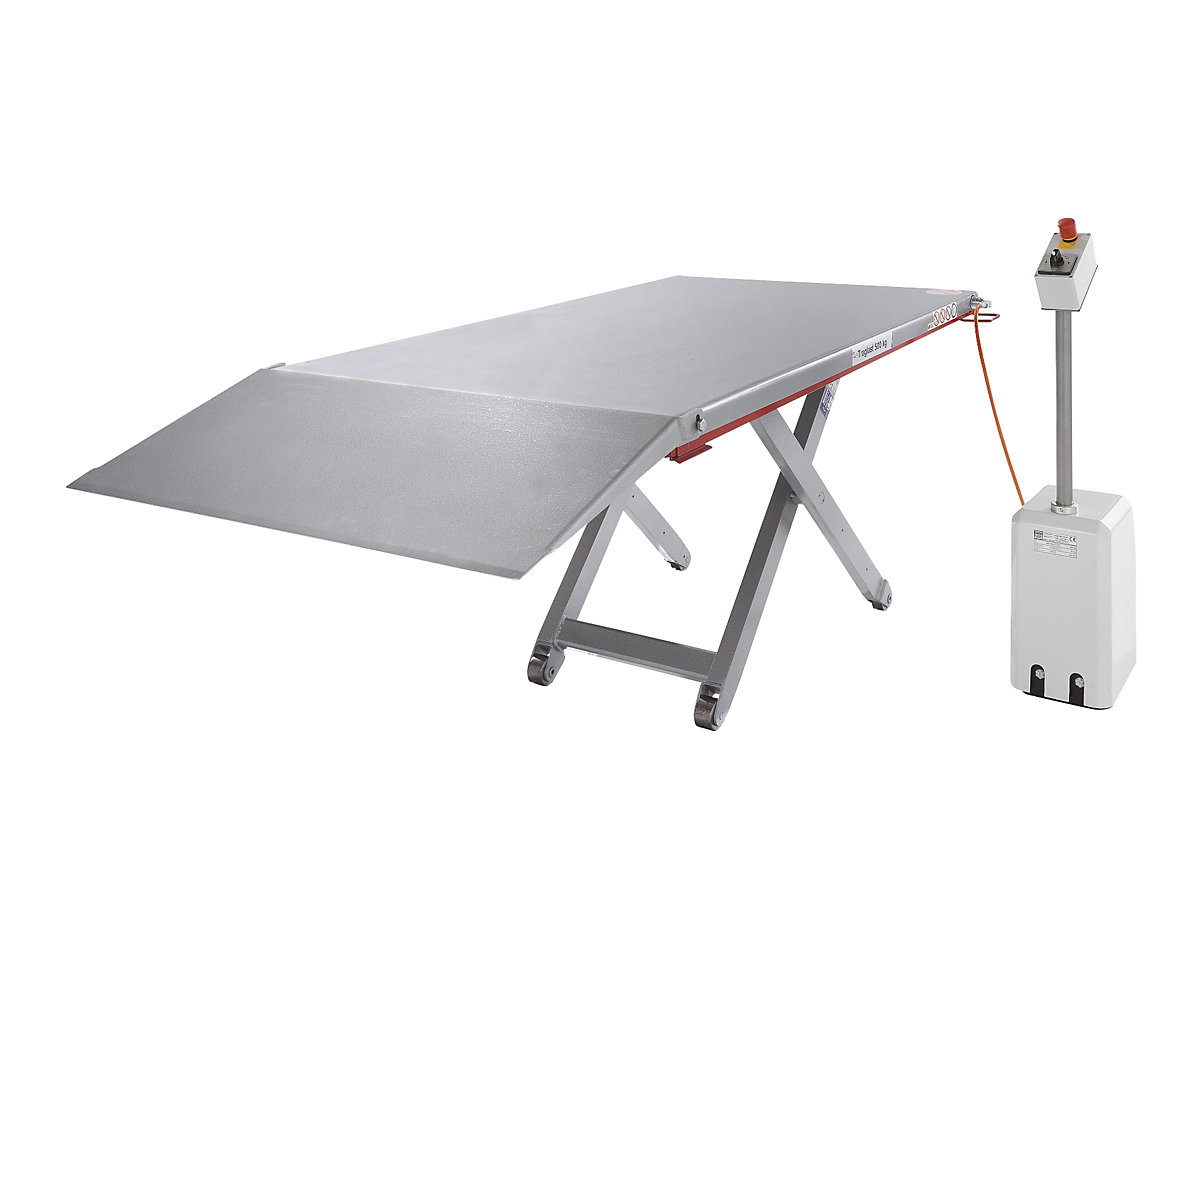 Low profile lift table, G series – Flexlift (Product illustration 5)